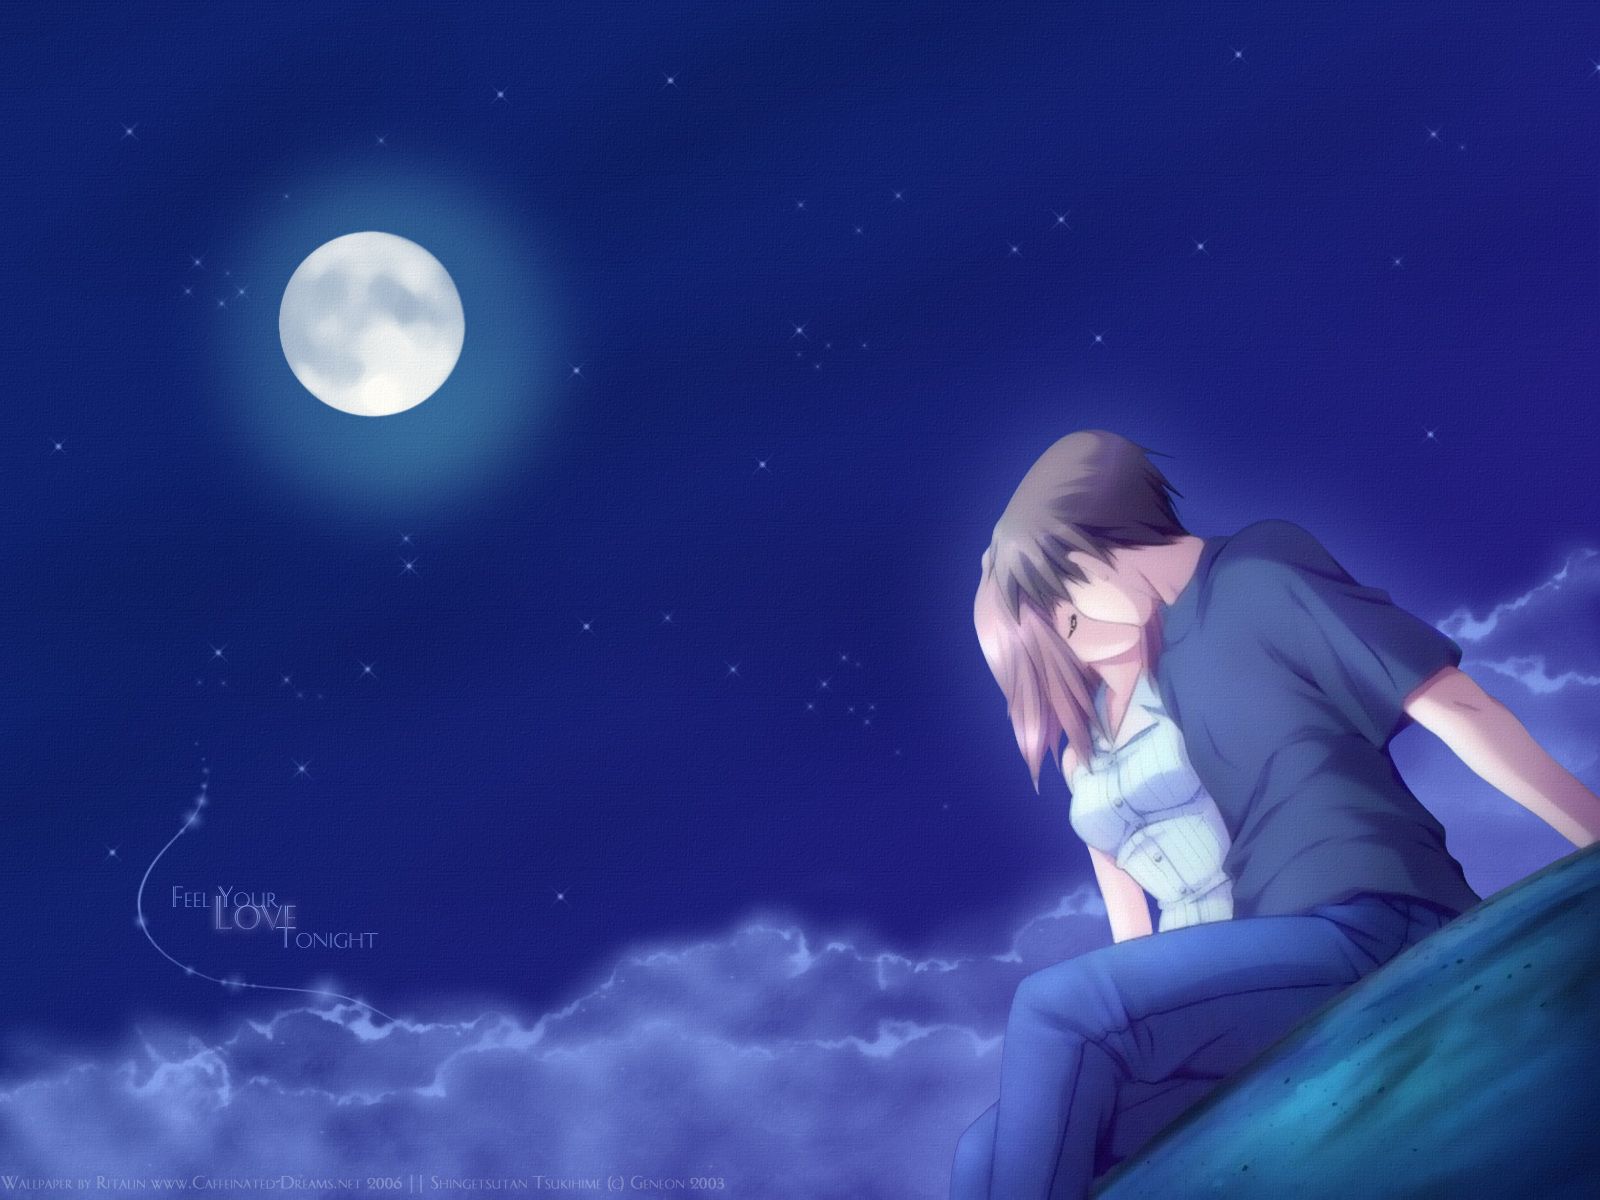 Free Download Awesome Love Anime Image